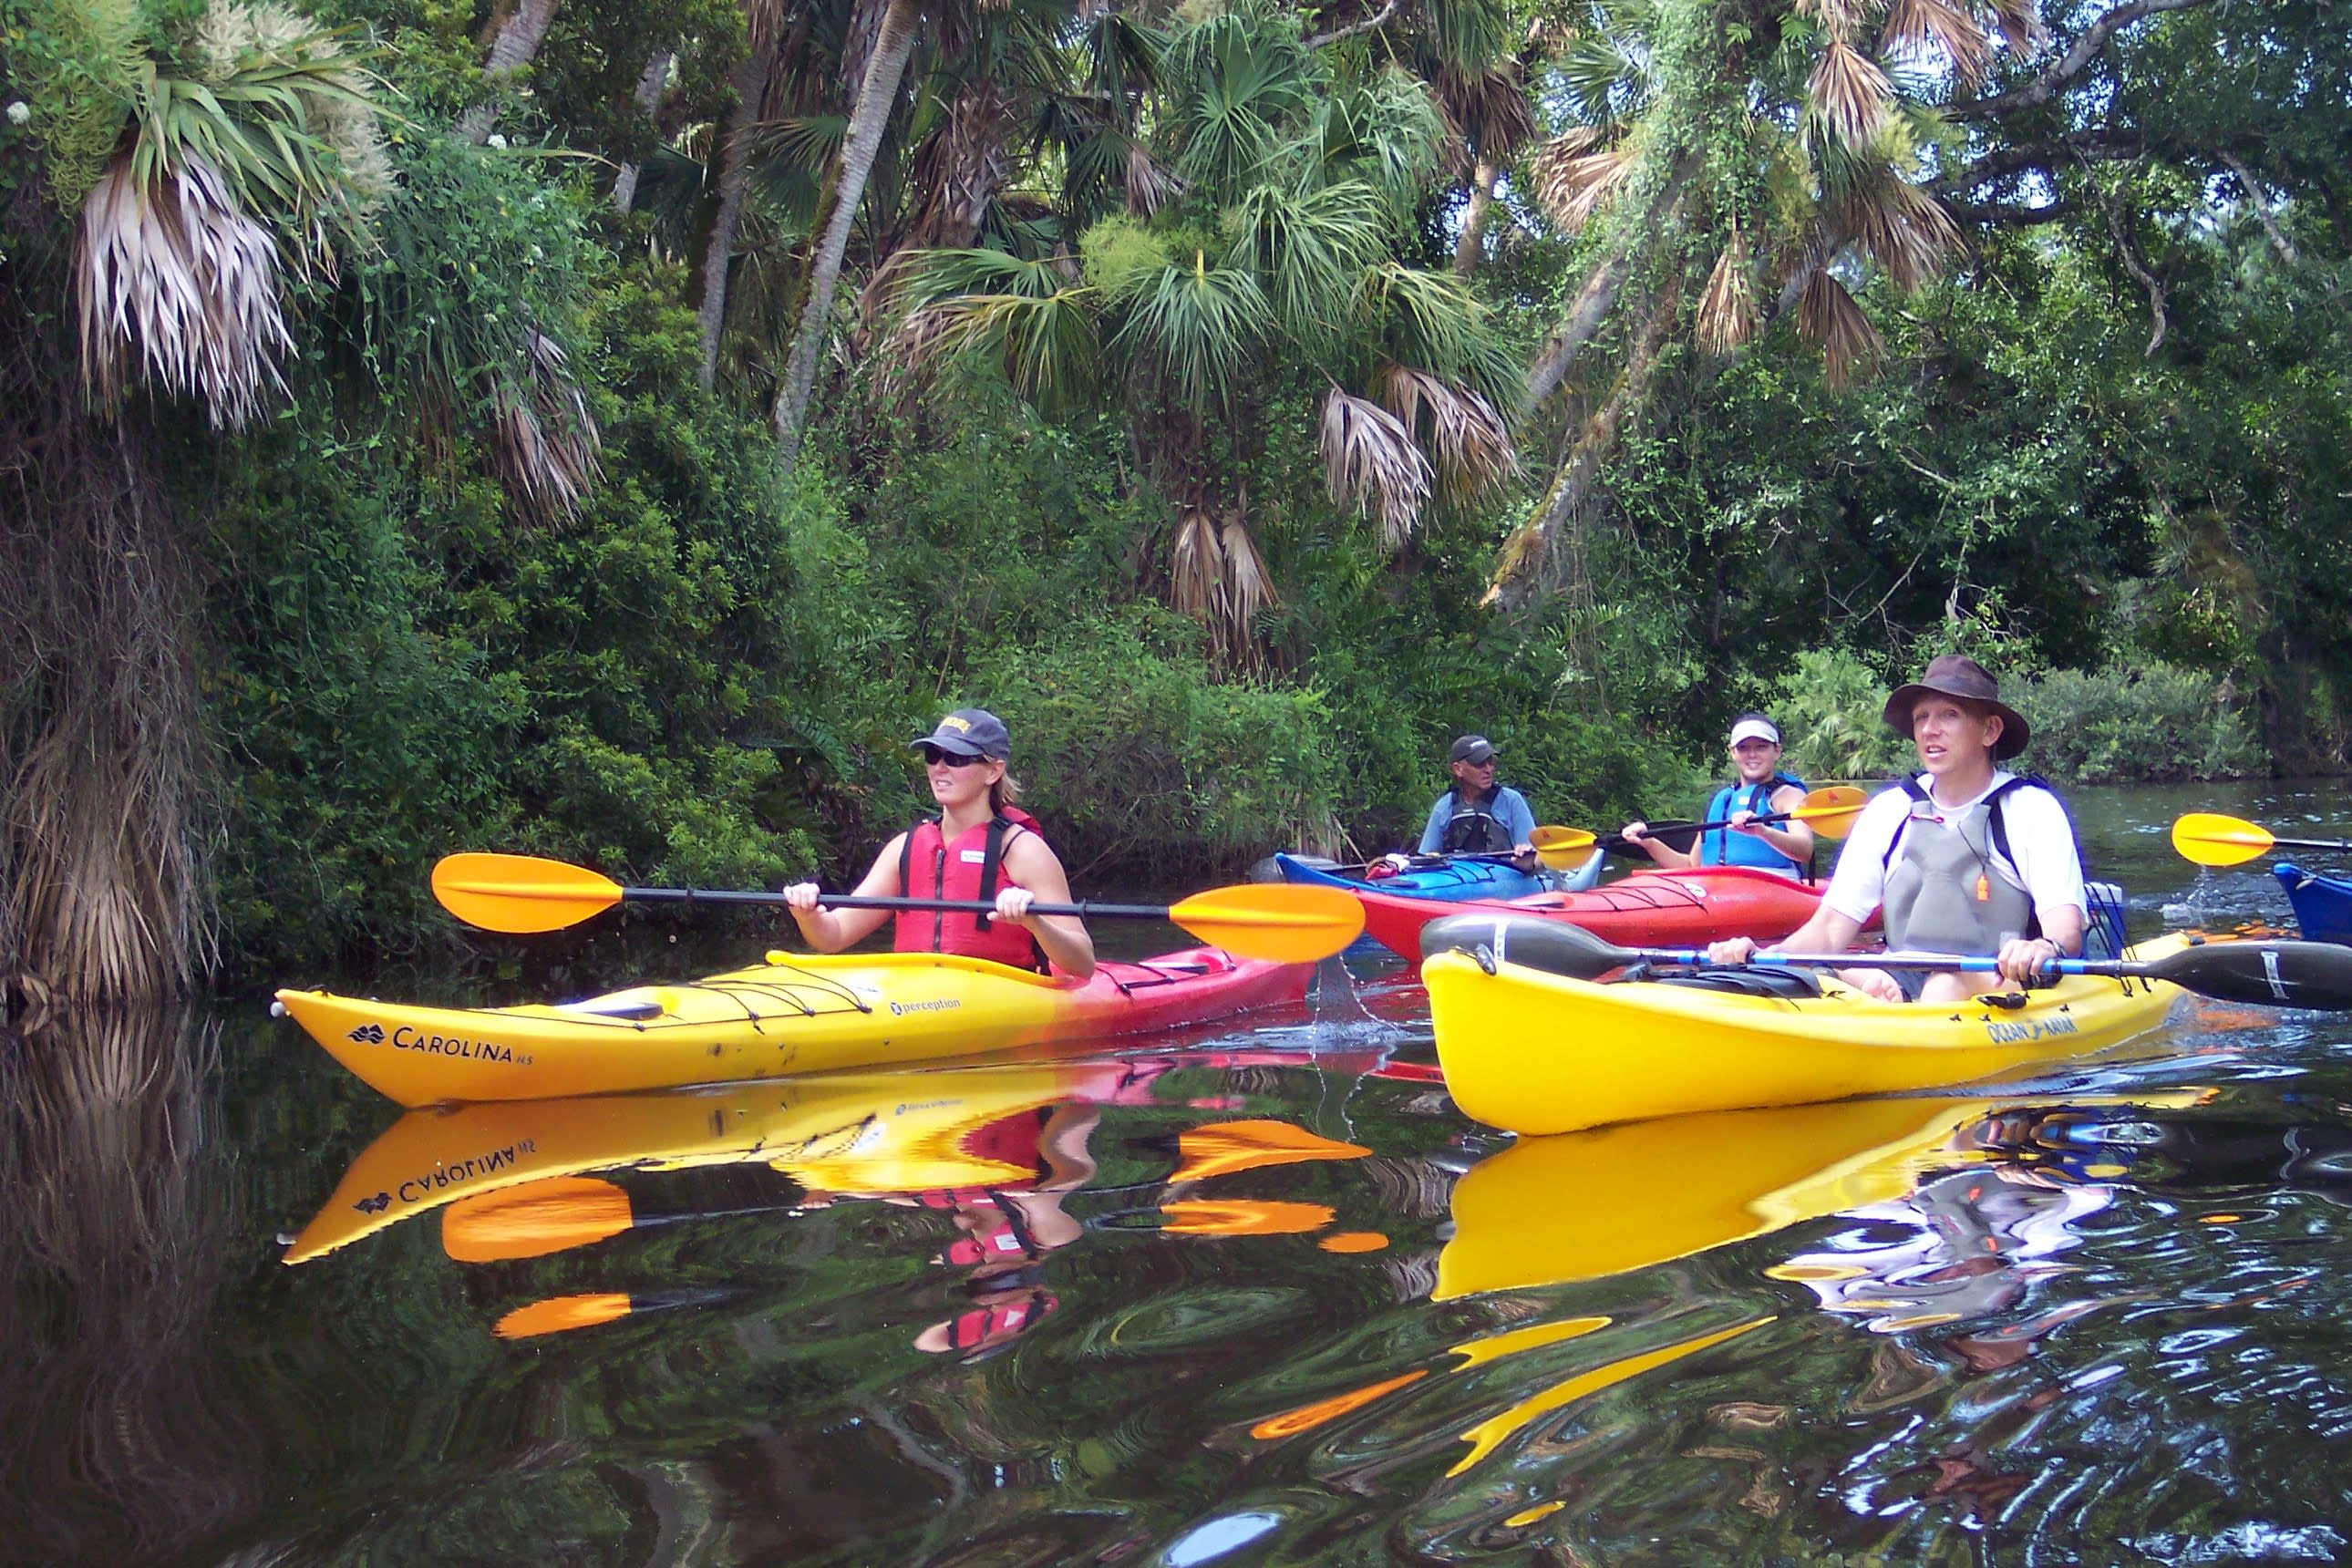 Kayak your way down the Indian River Lagoon, one of the most biologically diverse estuaries in North America.